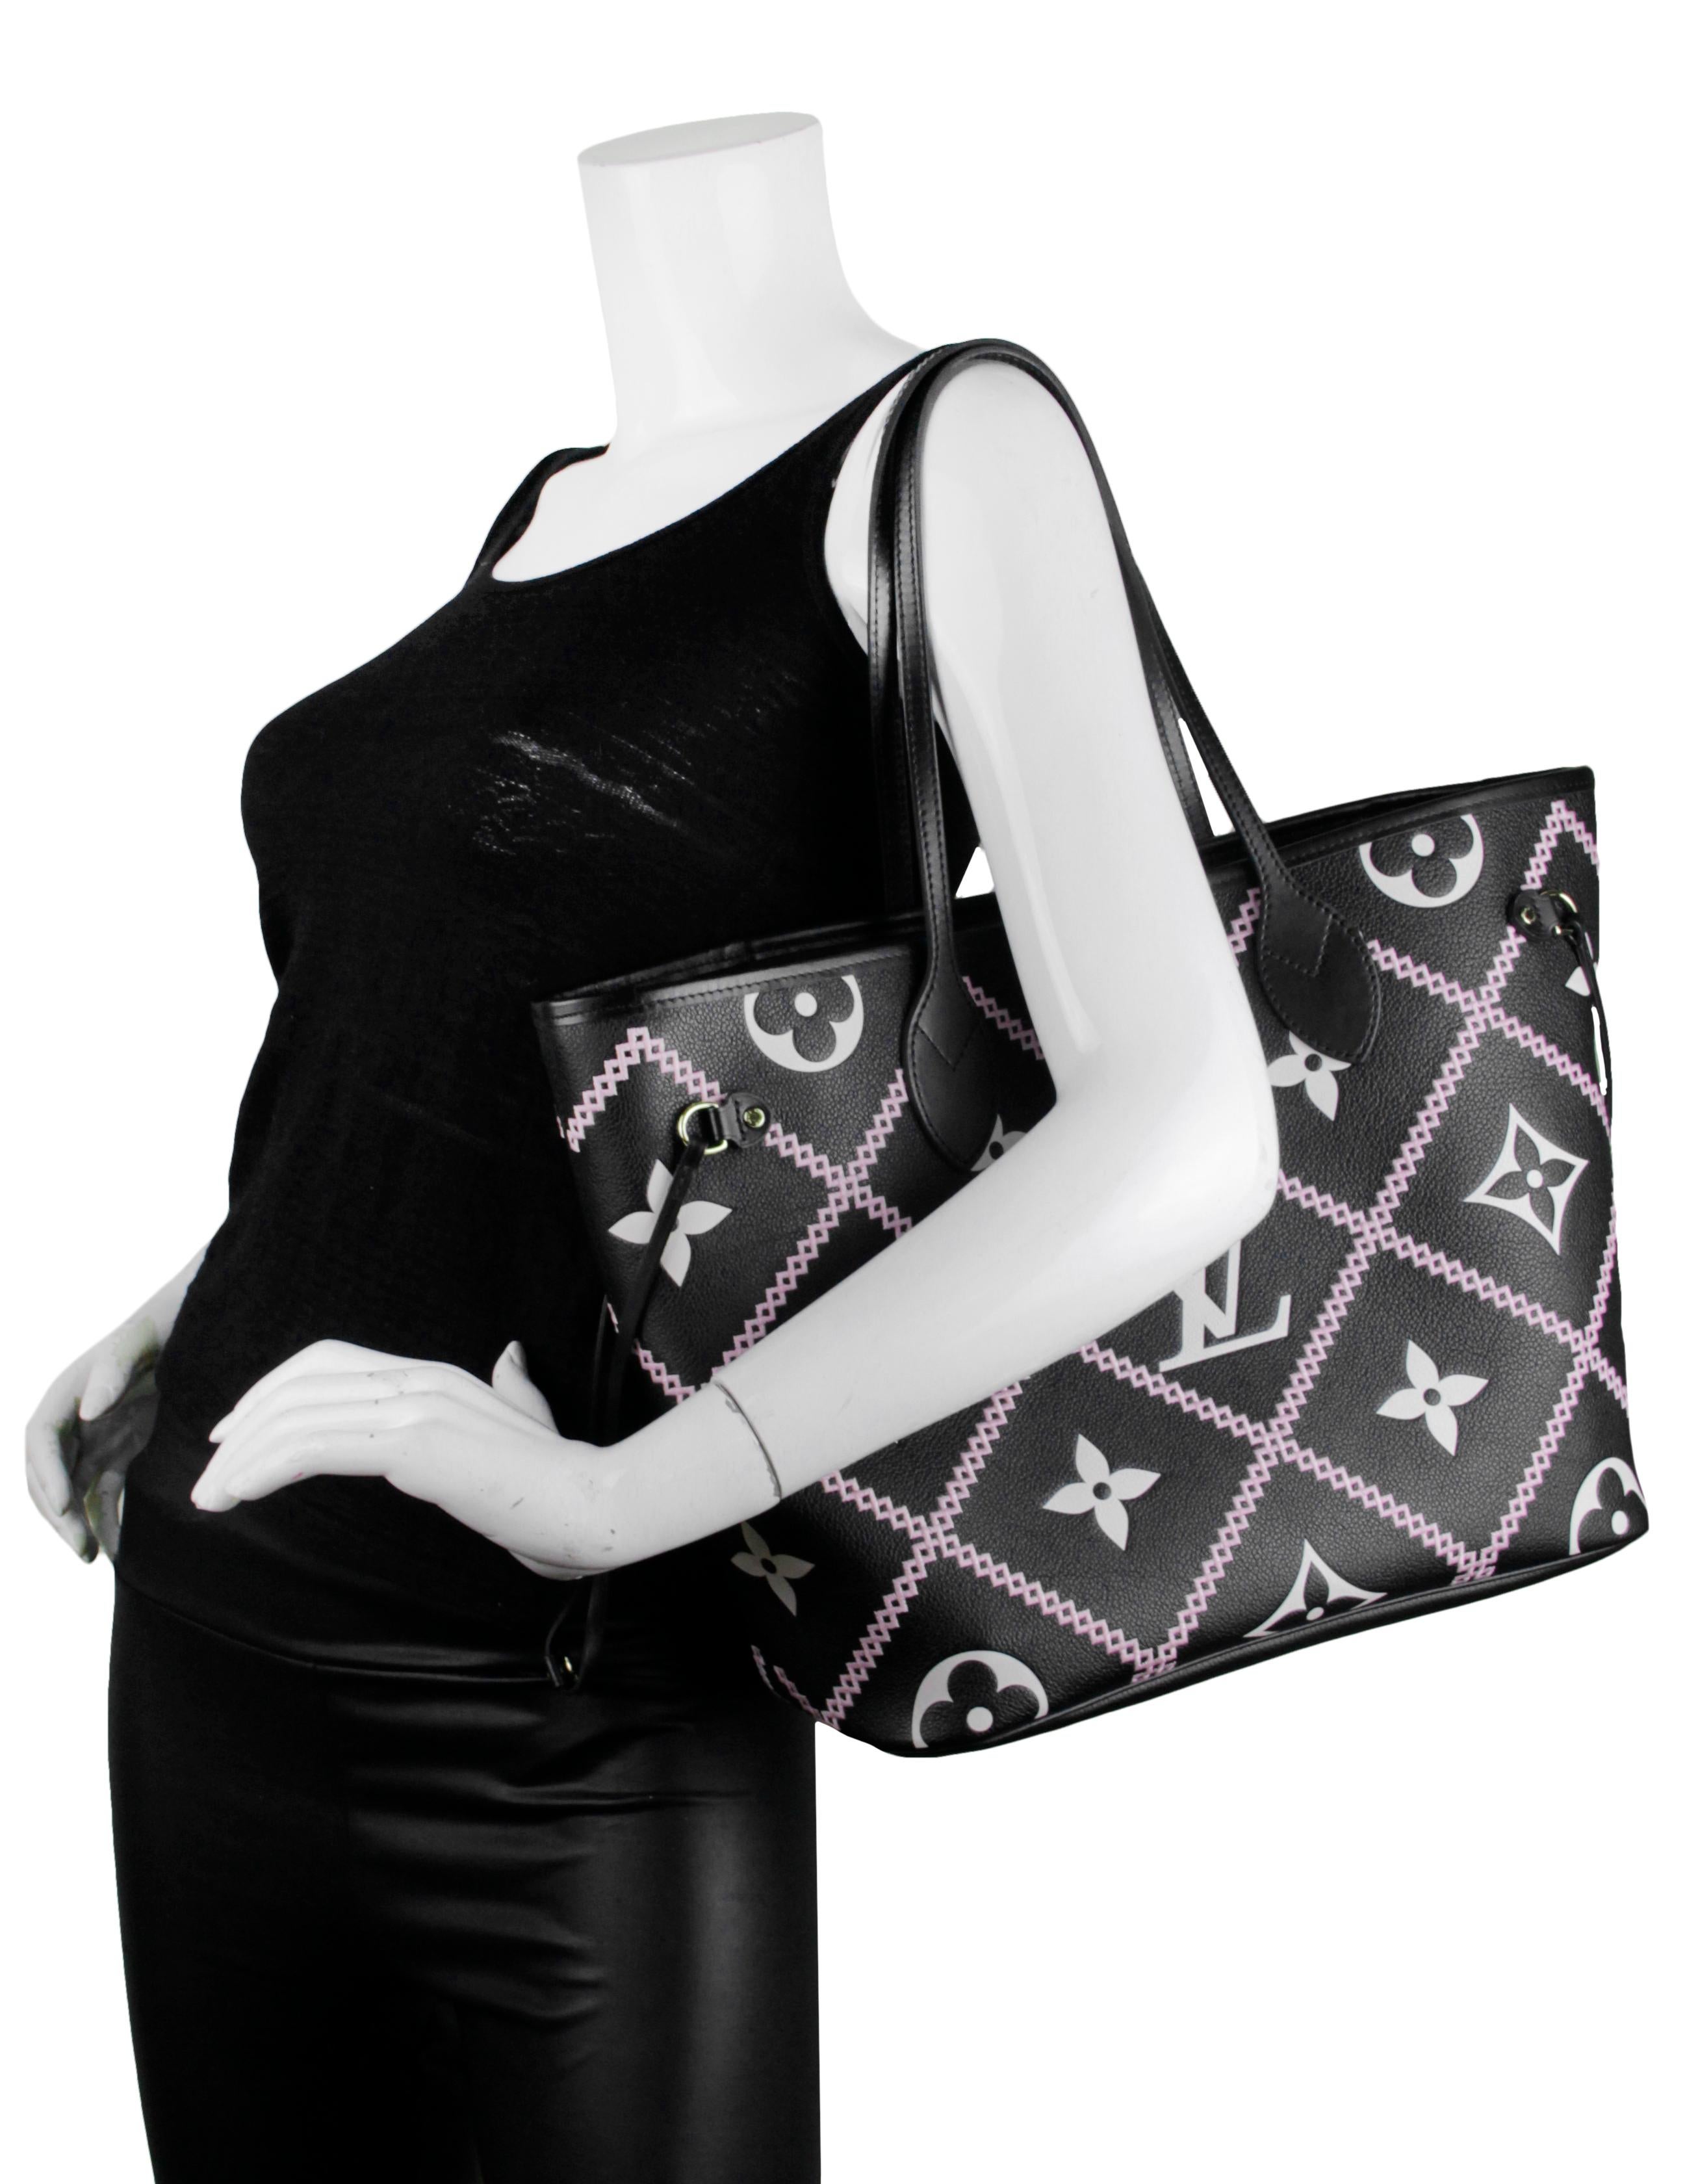 Louis Vuitton 2022 Black Empreinte Leather Monogram Giant Broderies Neverfull MM Tote Bag

Made In: Spain
Year of Production: 2022
Color: Black and white with pink embroidery
Hardware: Goldtone
Materials: Embroidered embossed supple grained cowhide